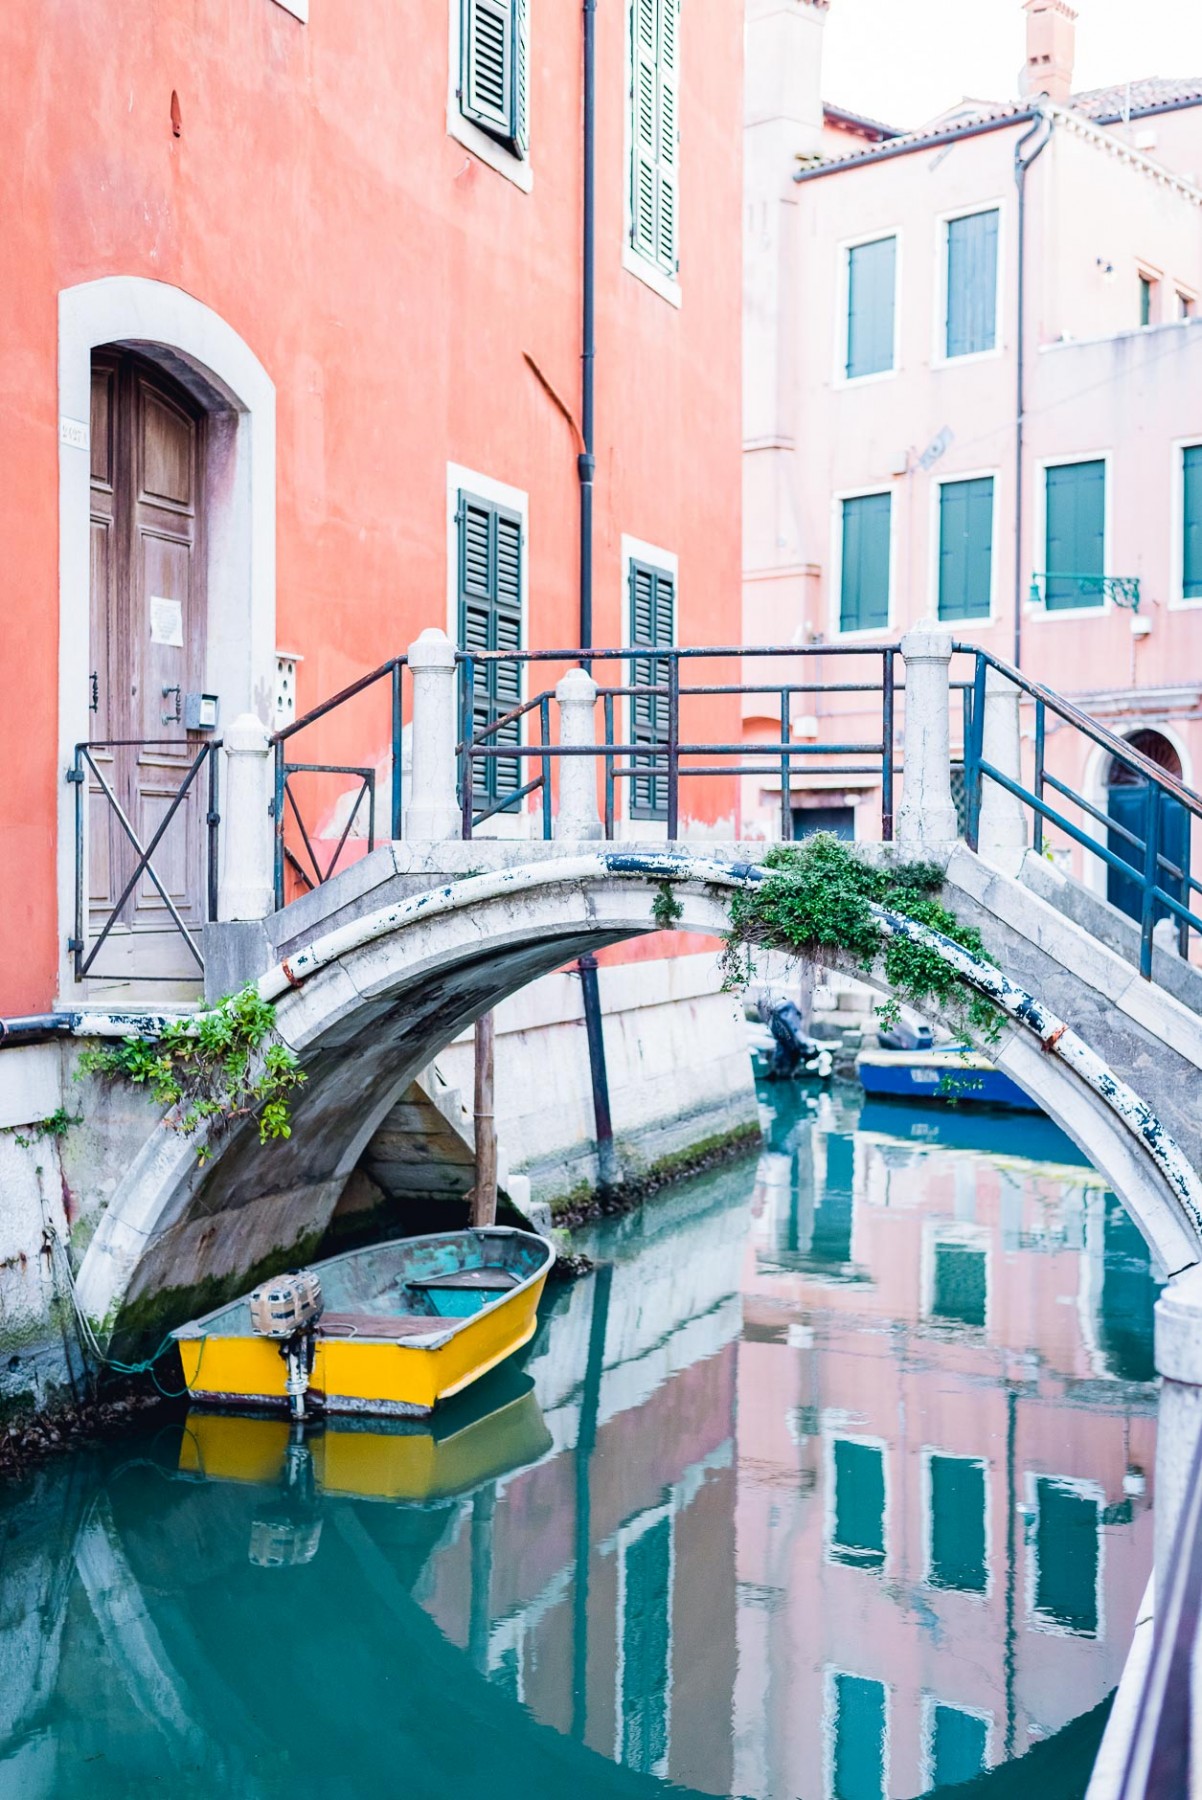 Travel tips for Venice, Italy 